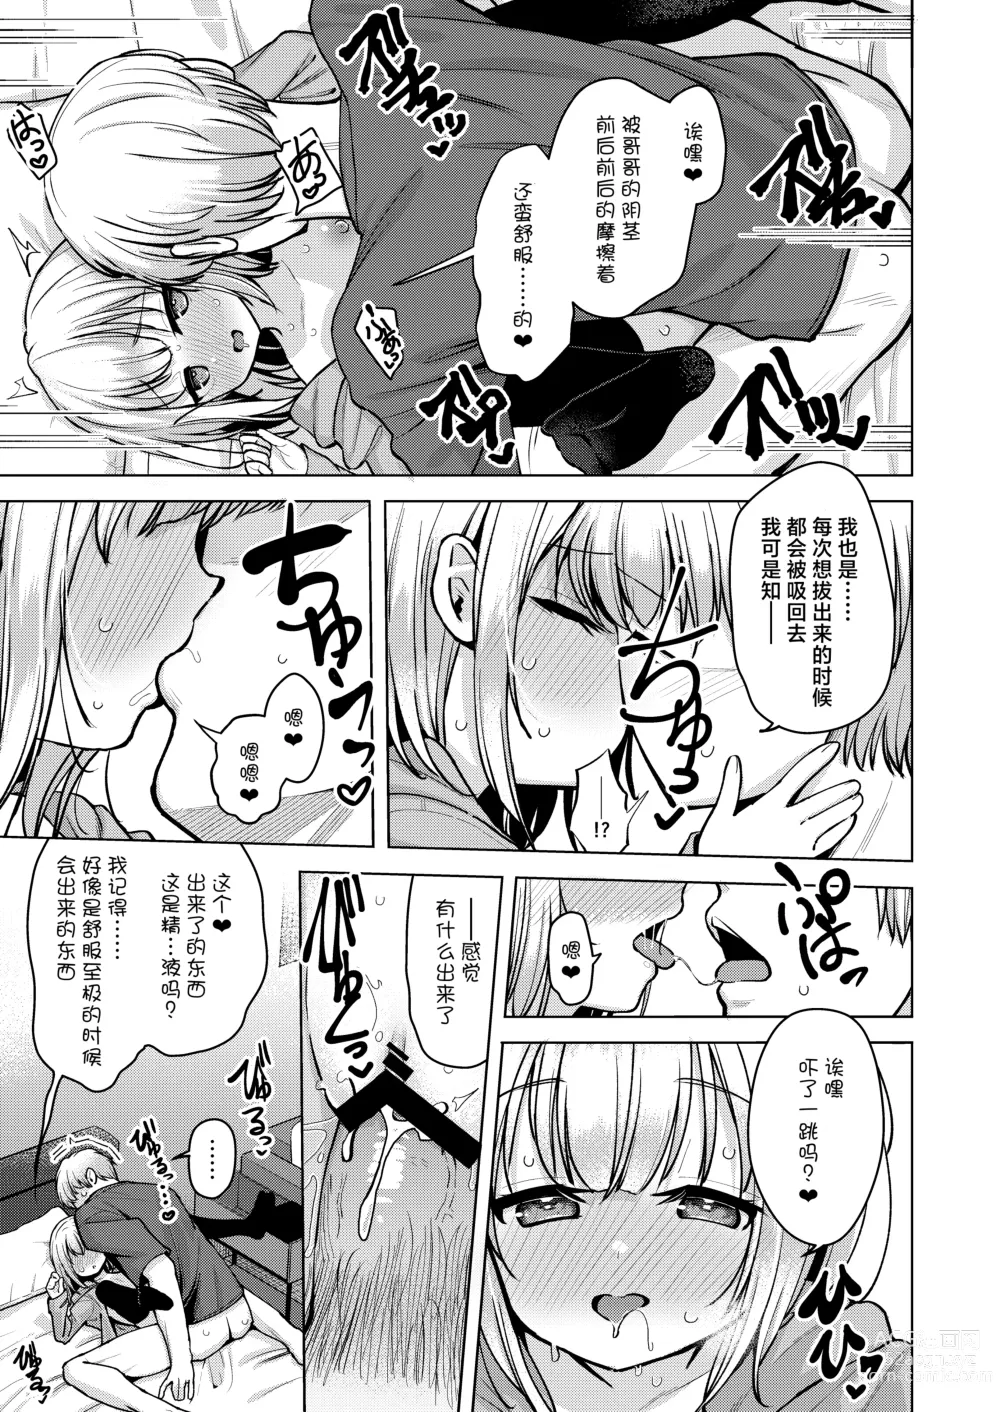 Page 17 of doujinshi 邪心妹妹真是太棒了